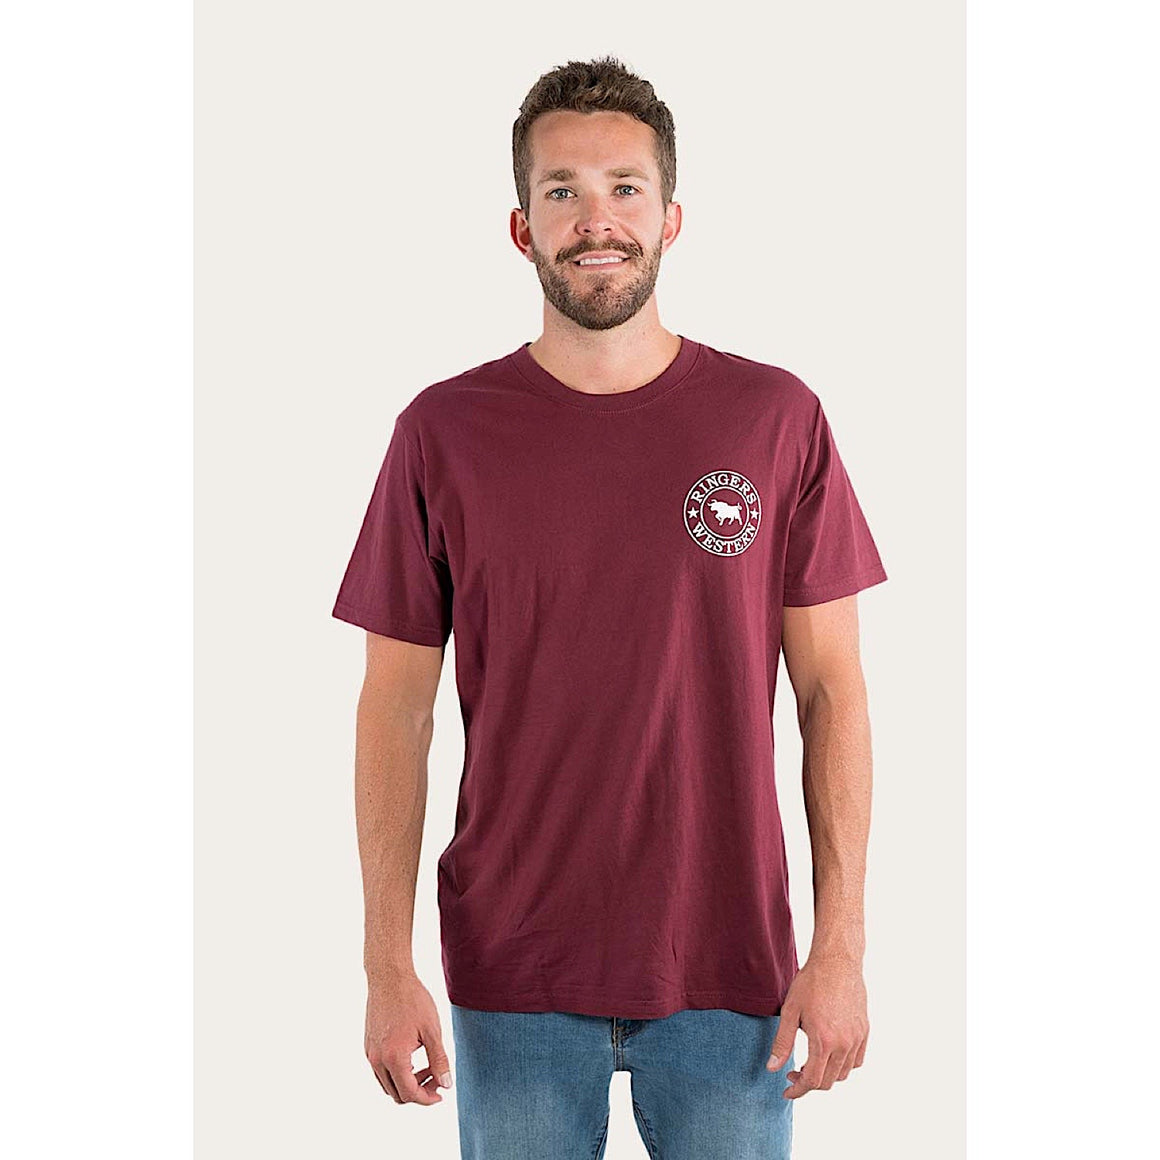 Ringers Western Signature Bull Men's Loose T-Shirt - Burgundy with White Print